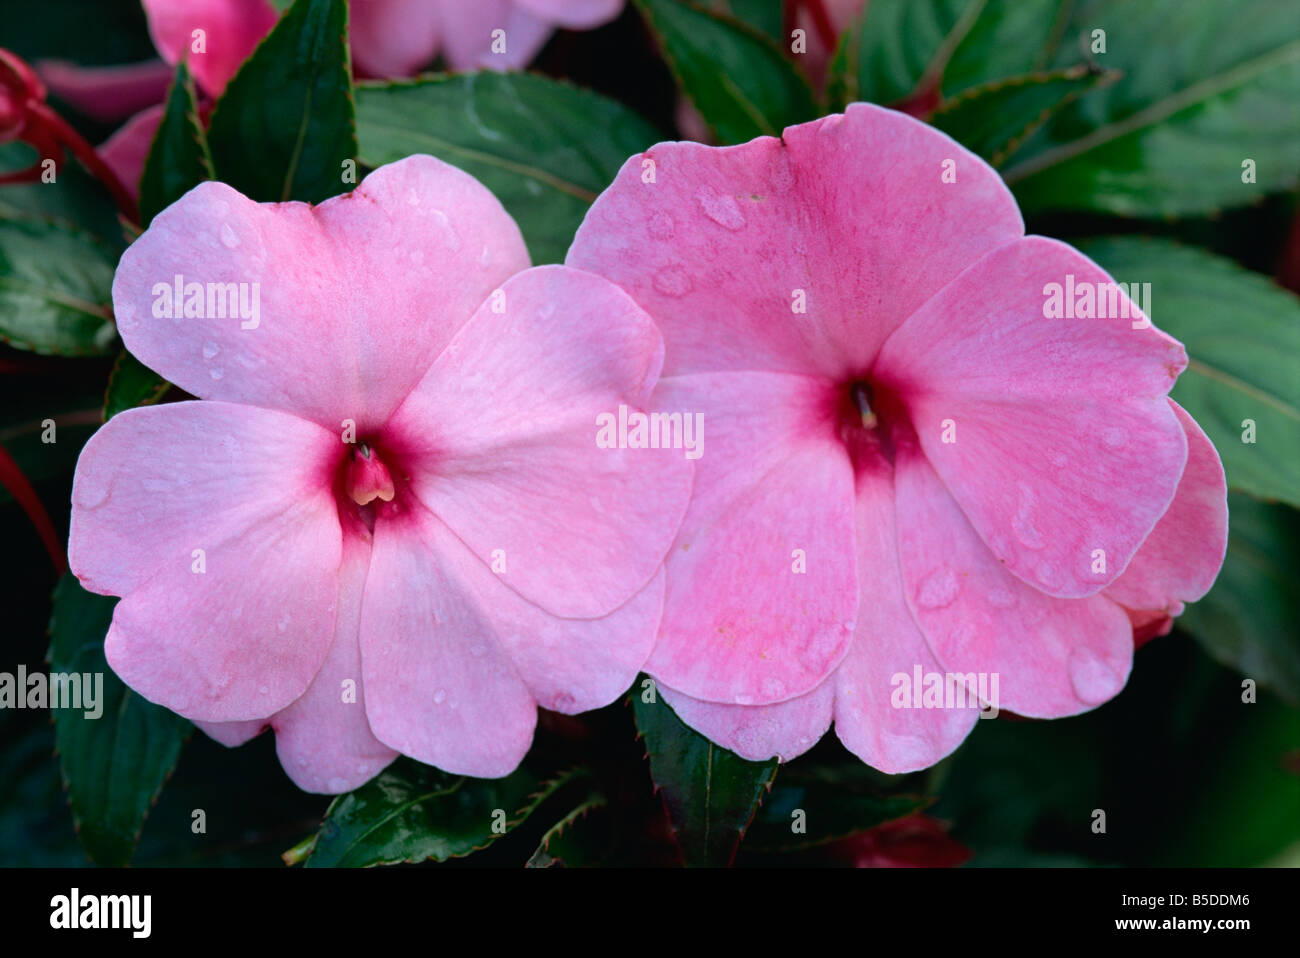 Close-up of Impatiens flowers, England, Europe Stock Photo